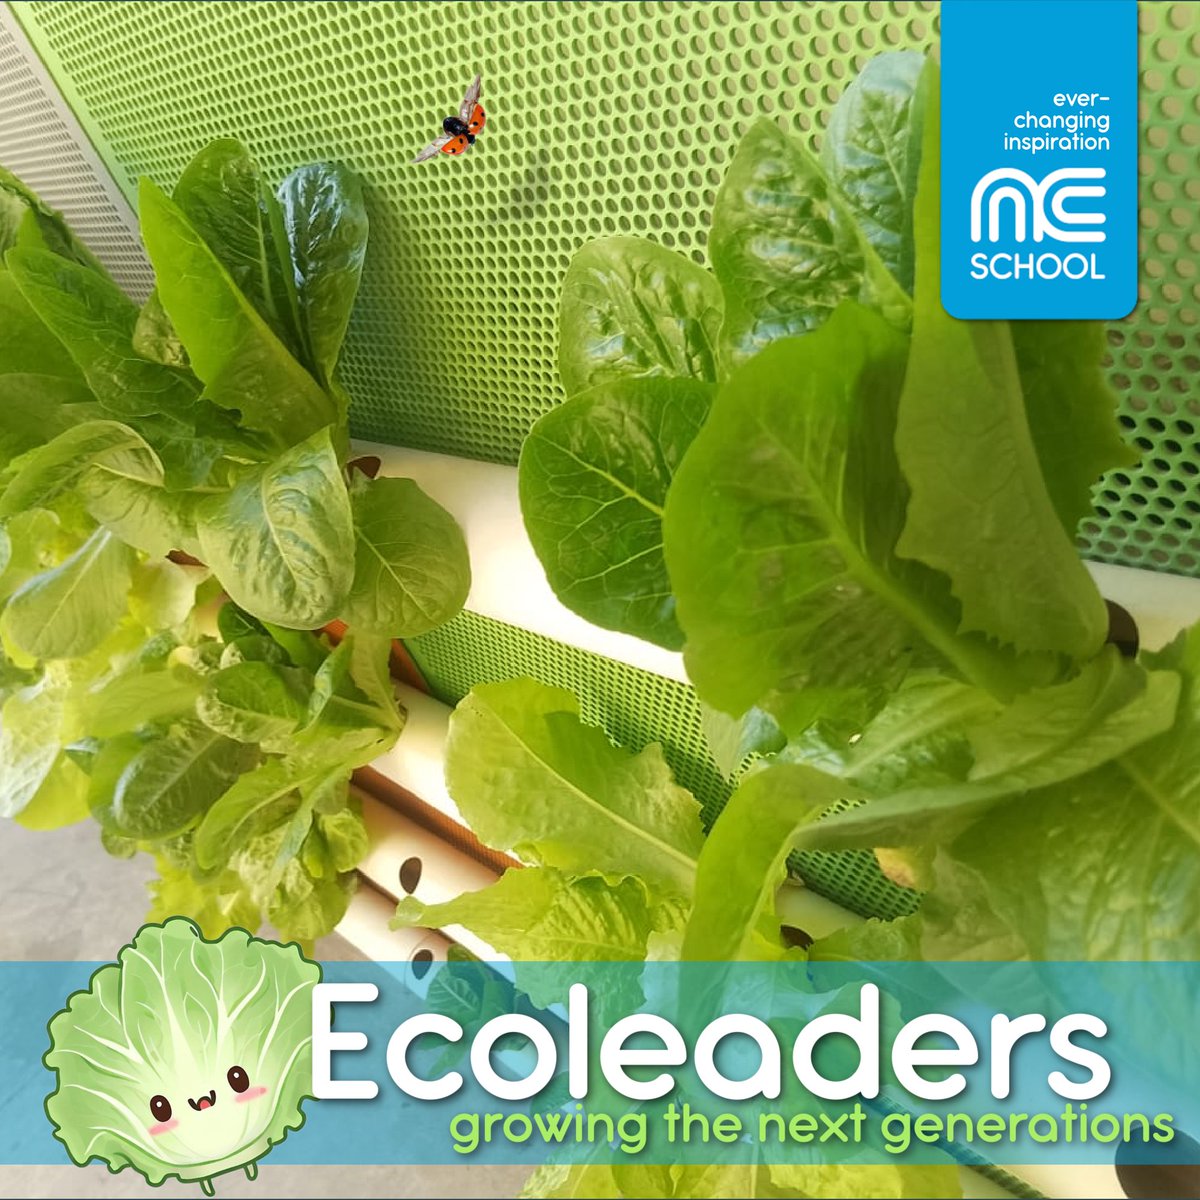 NC School CDMX:

🌱 Nurturing Tomorrow's Leaders! 🌈 Exciting things are sprouting at NC School Preschool EcoLeaders! 🏫👶 Our dedicated team is passionately cultivating a green and sustainable learning environment for the little ones. 🌎✨

#NCSchool #Preschool